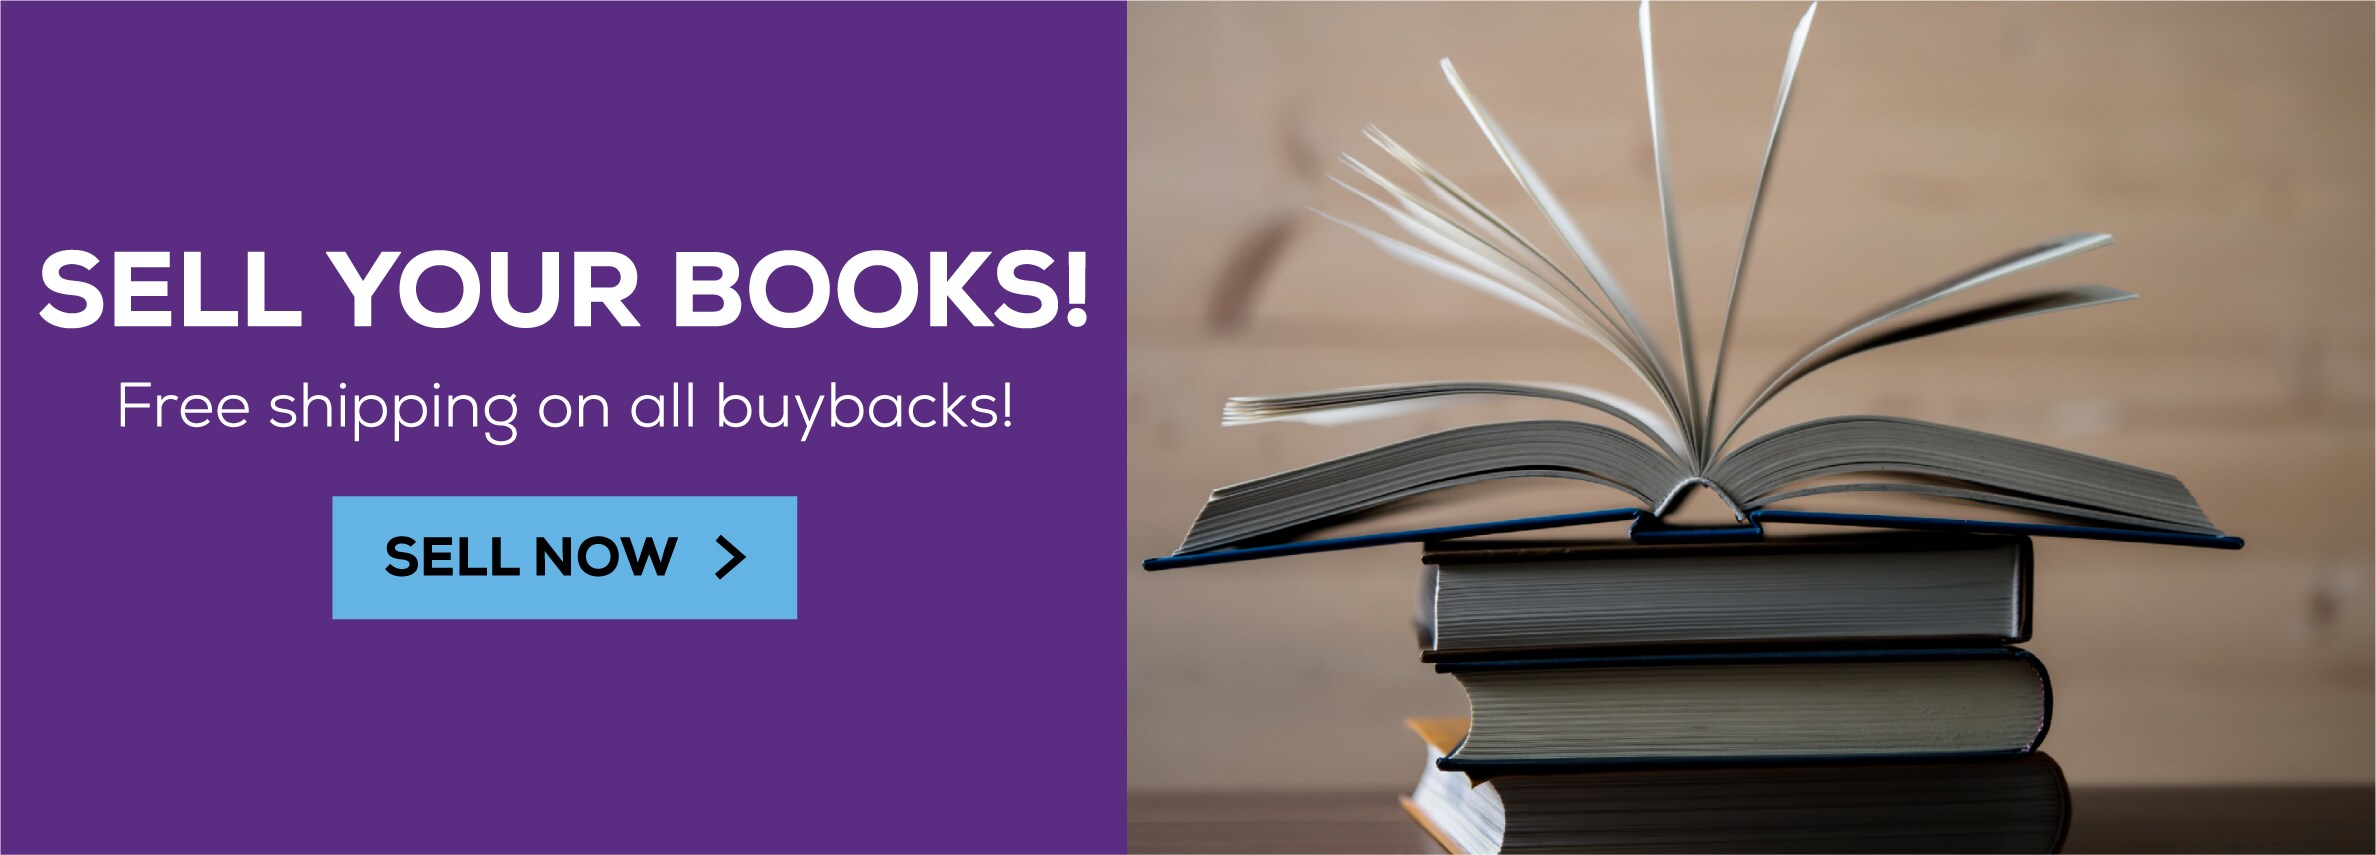 Sell your books online! Free shipping on all buybacks. Sell now.